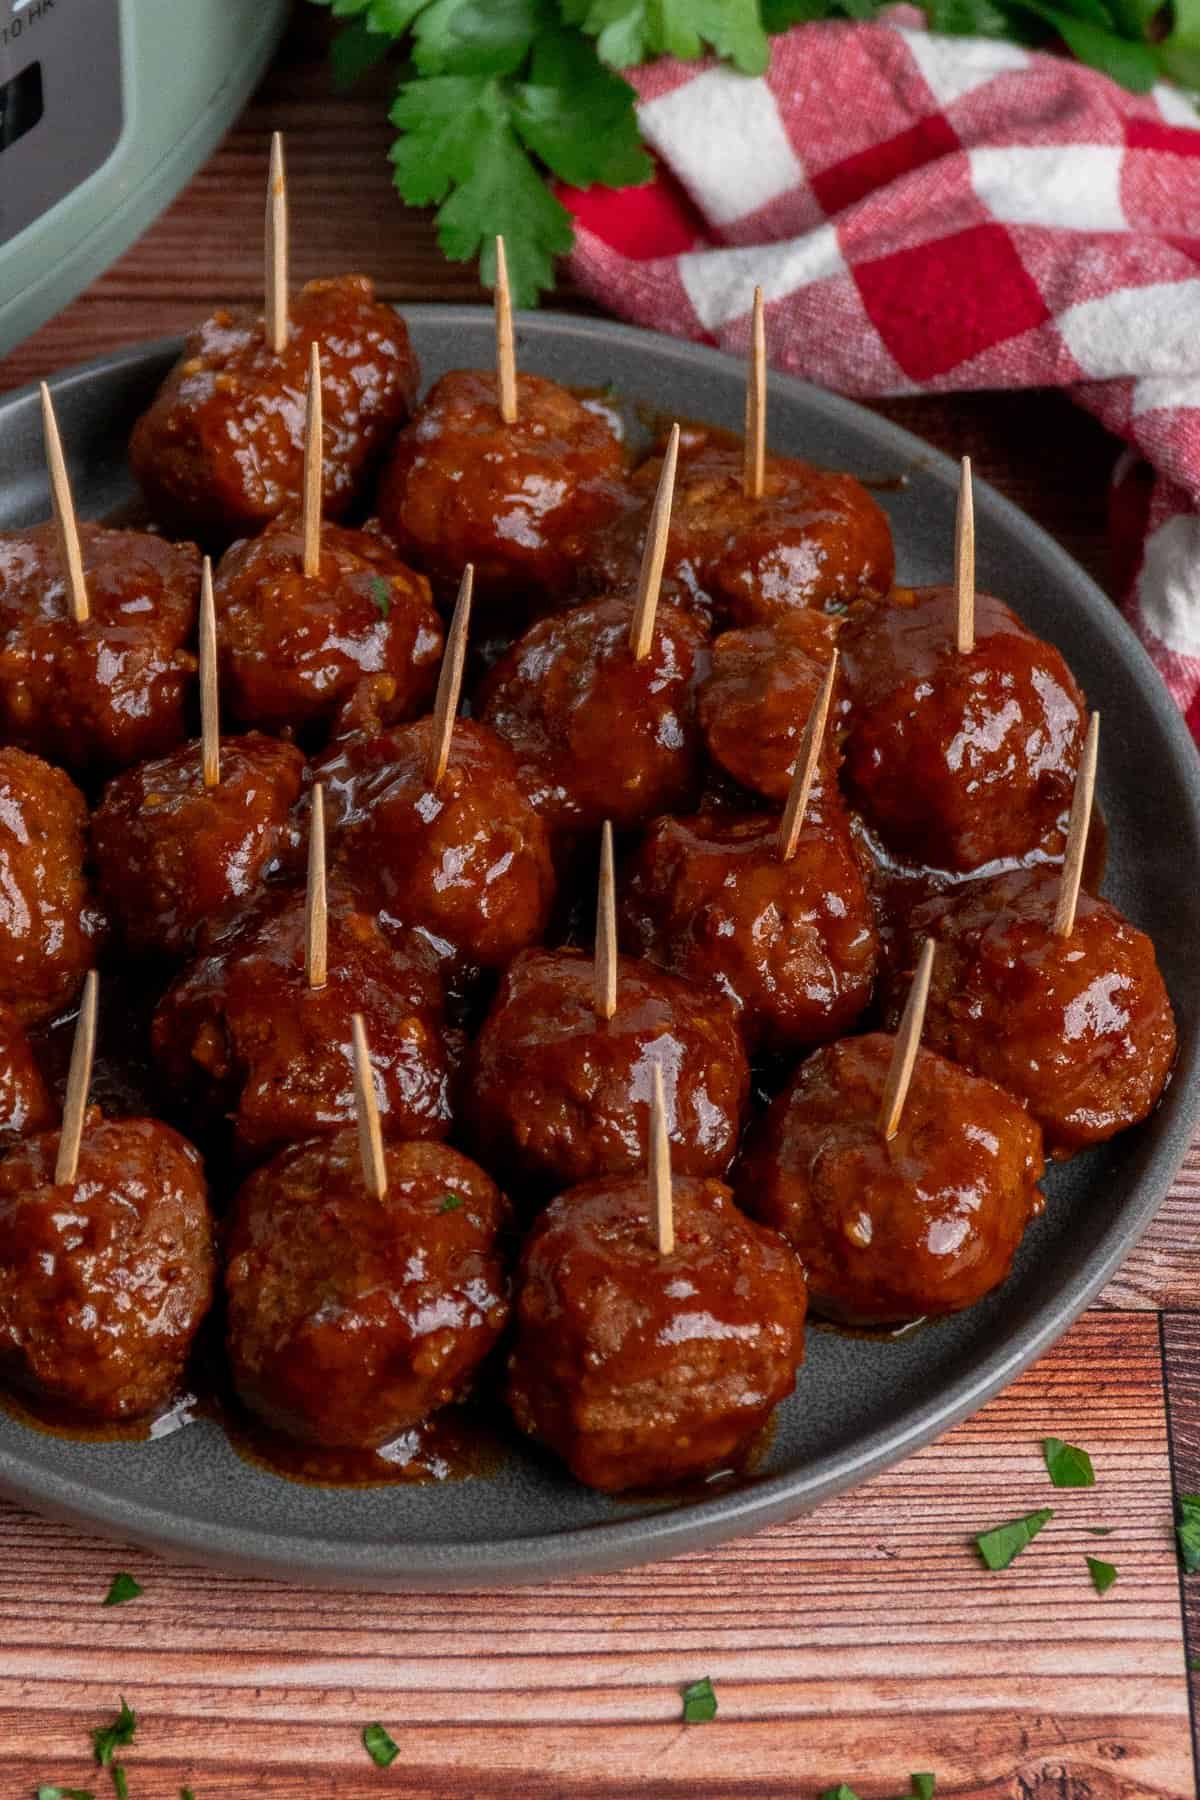 Close-up of BBQ meatballs on a plate with toothpicks in them.